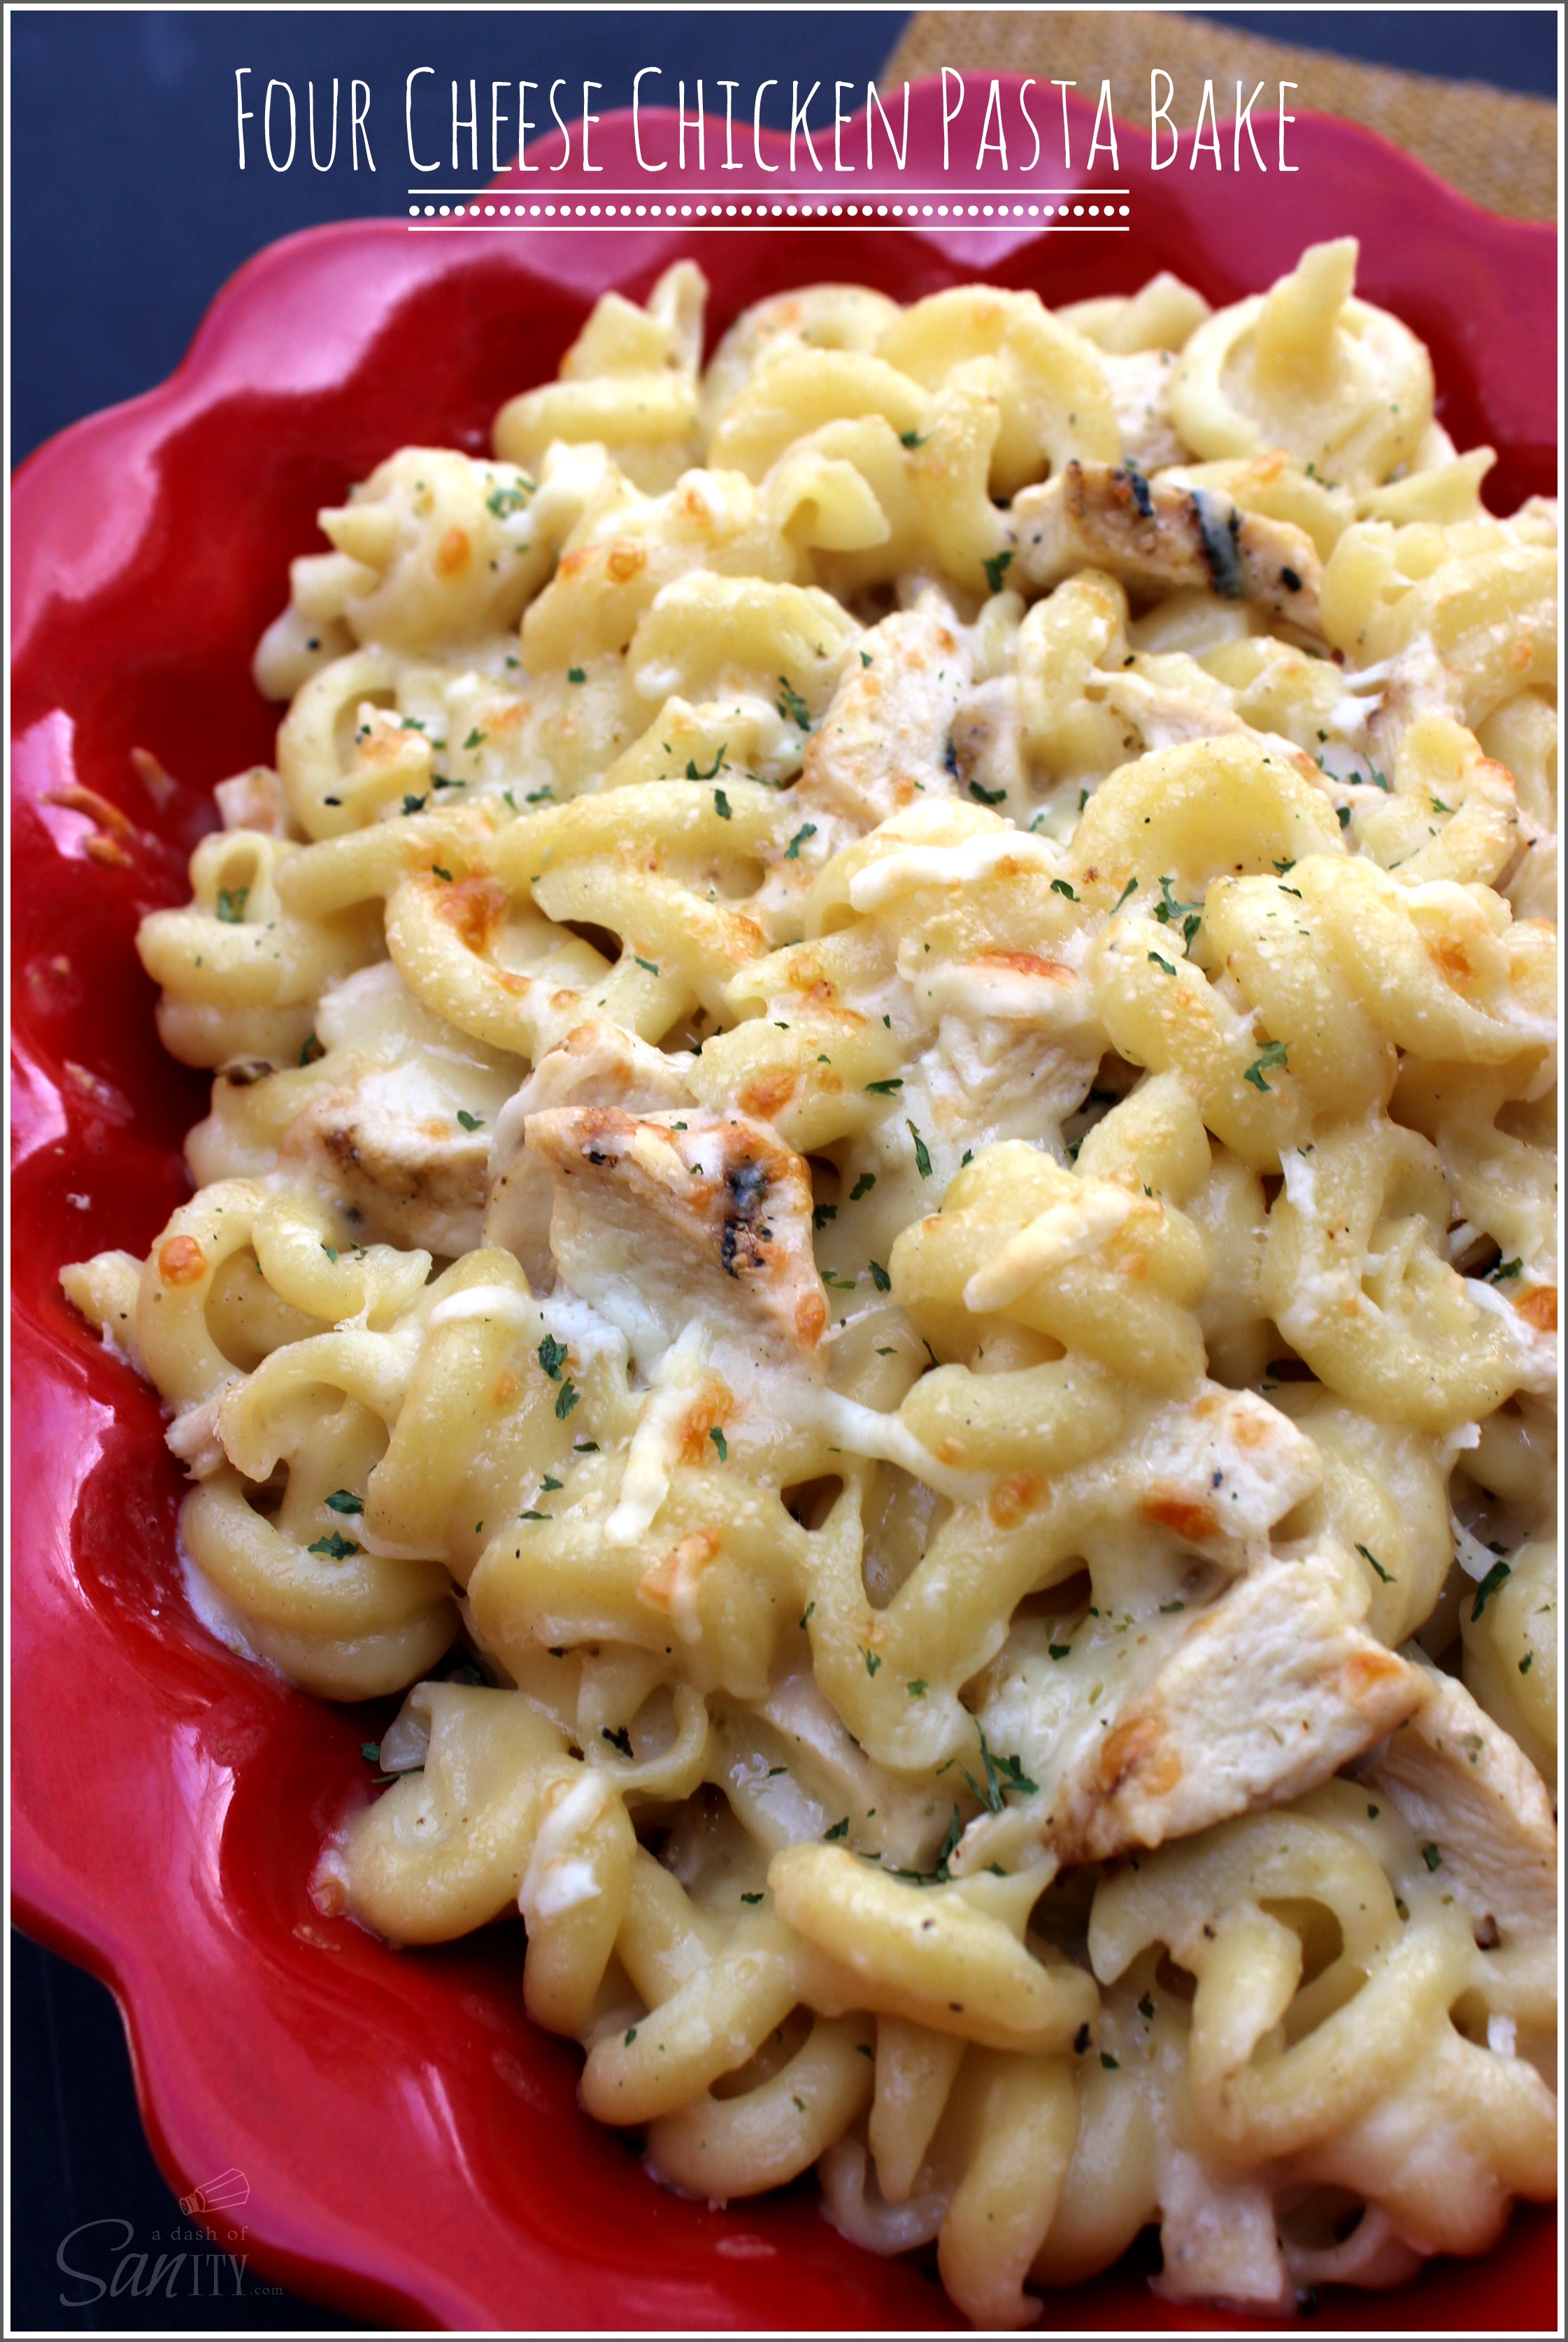 Baked mac and cheese noodles - picturespaas